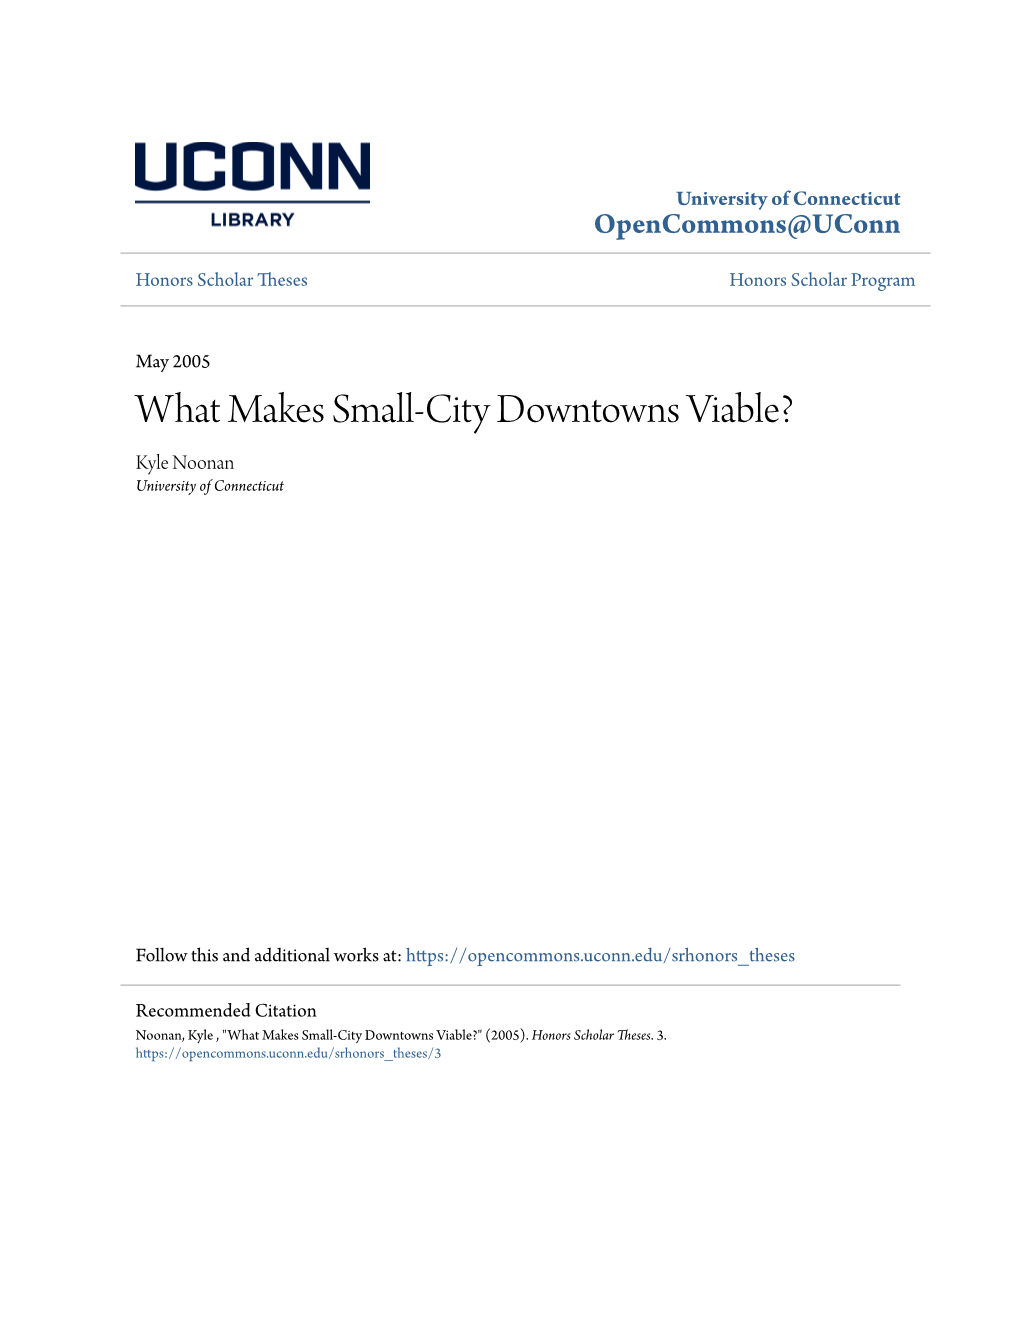 What Makes Small-City Downtowns Viable? Kyle Noonan University of Connecticut